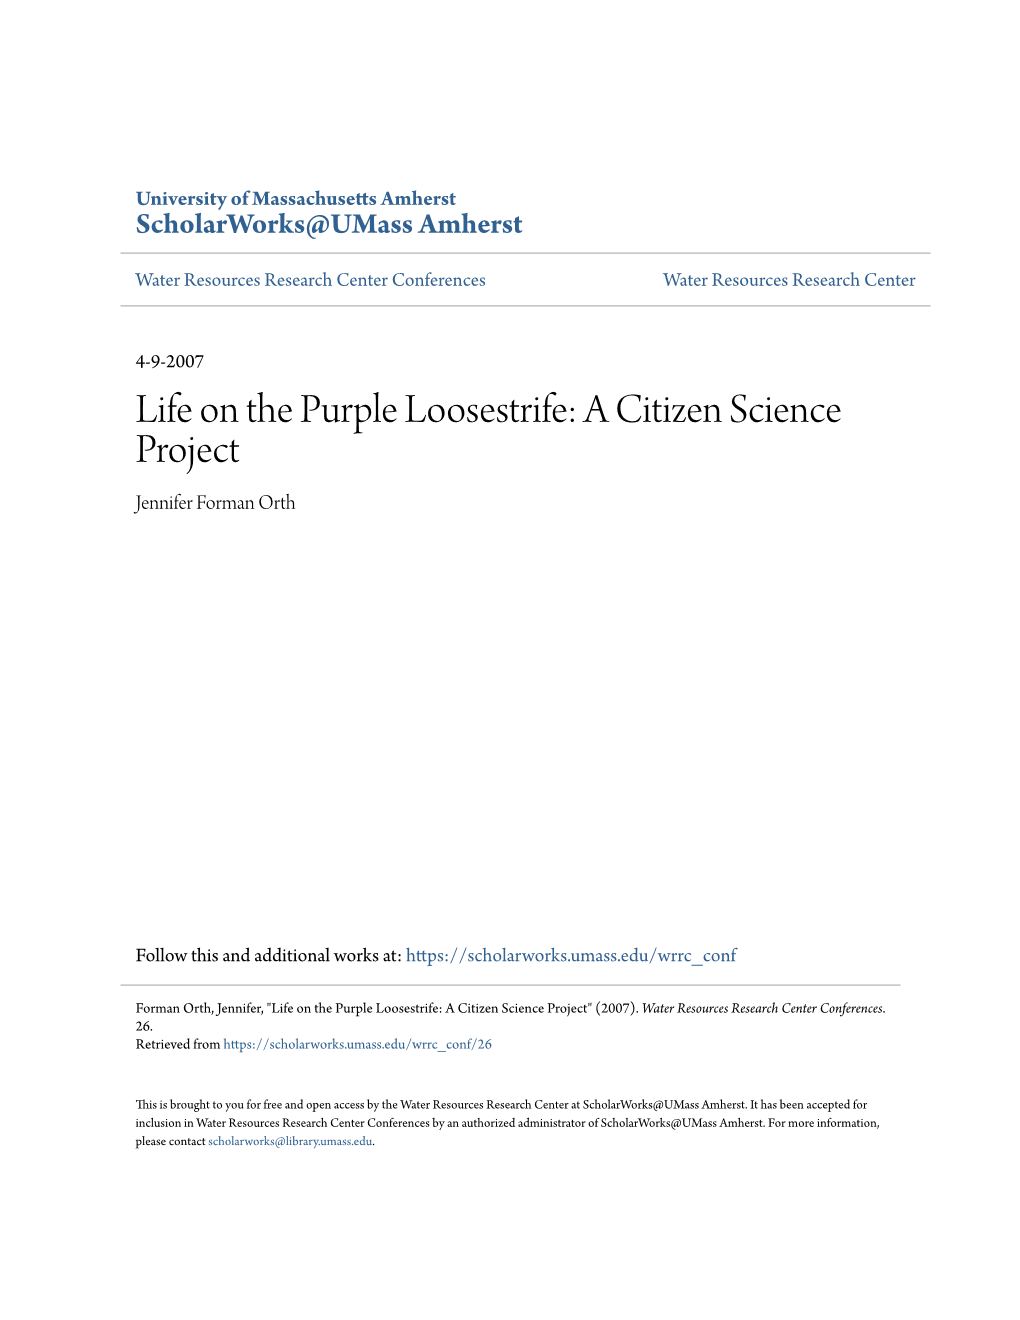 Life on the Purple Loosestrife: a Citizen Science Project Jennifer Forman Orth